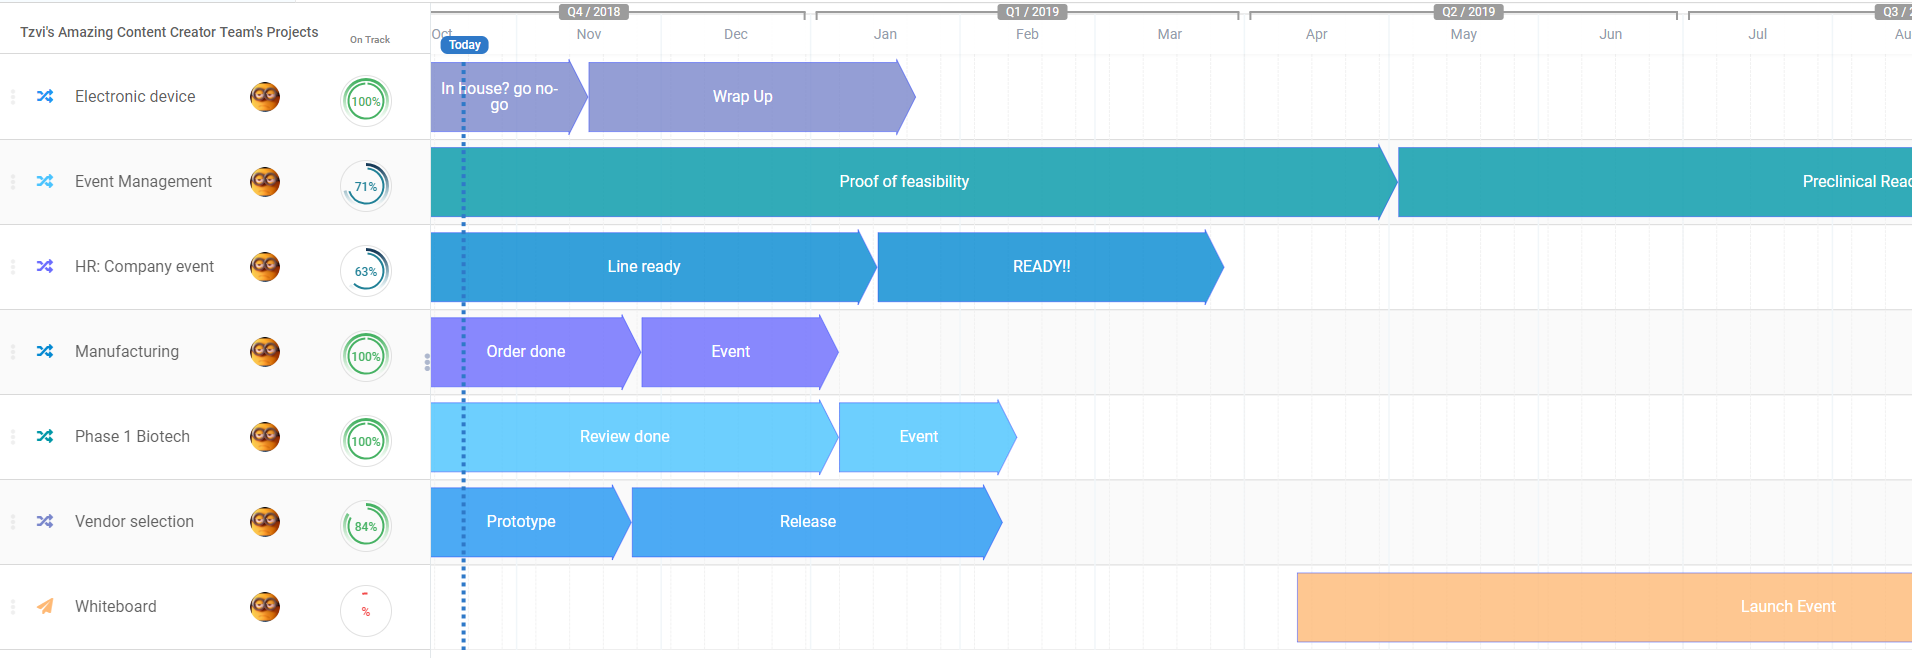 Proggio - Project Portfolio Management view - track all your projects in one screen